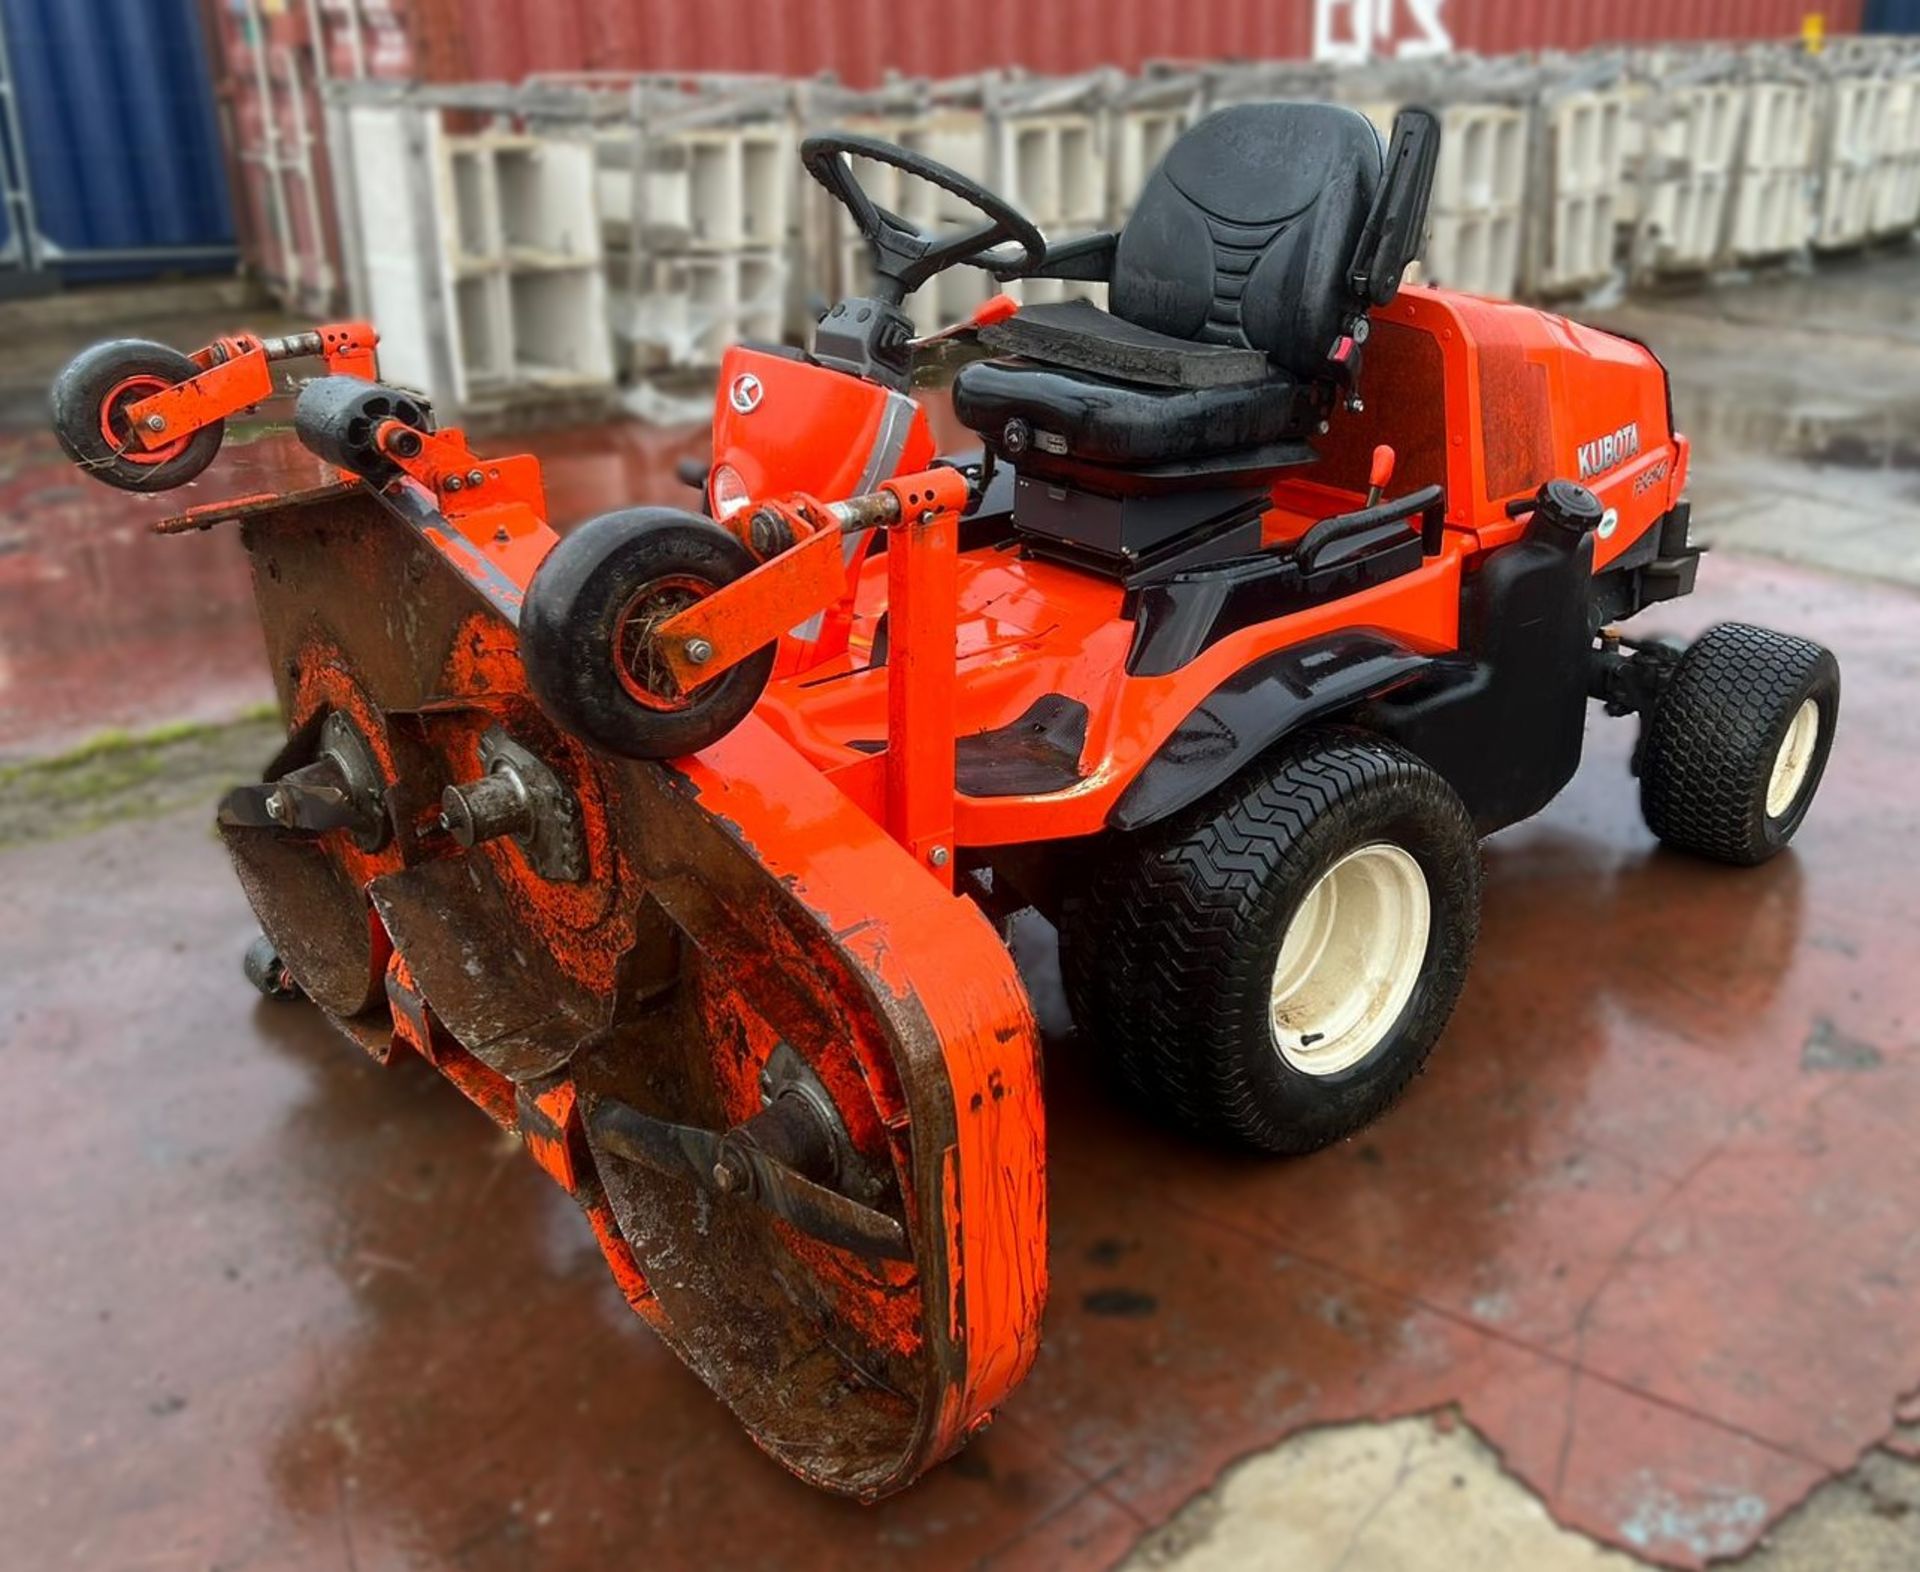 A Kubota F3680-EC 4WD Ride On Mower with 3 blade Mower Deck (one blade missing) and towing hitch, - Image 2 of 13